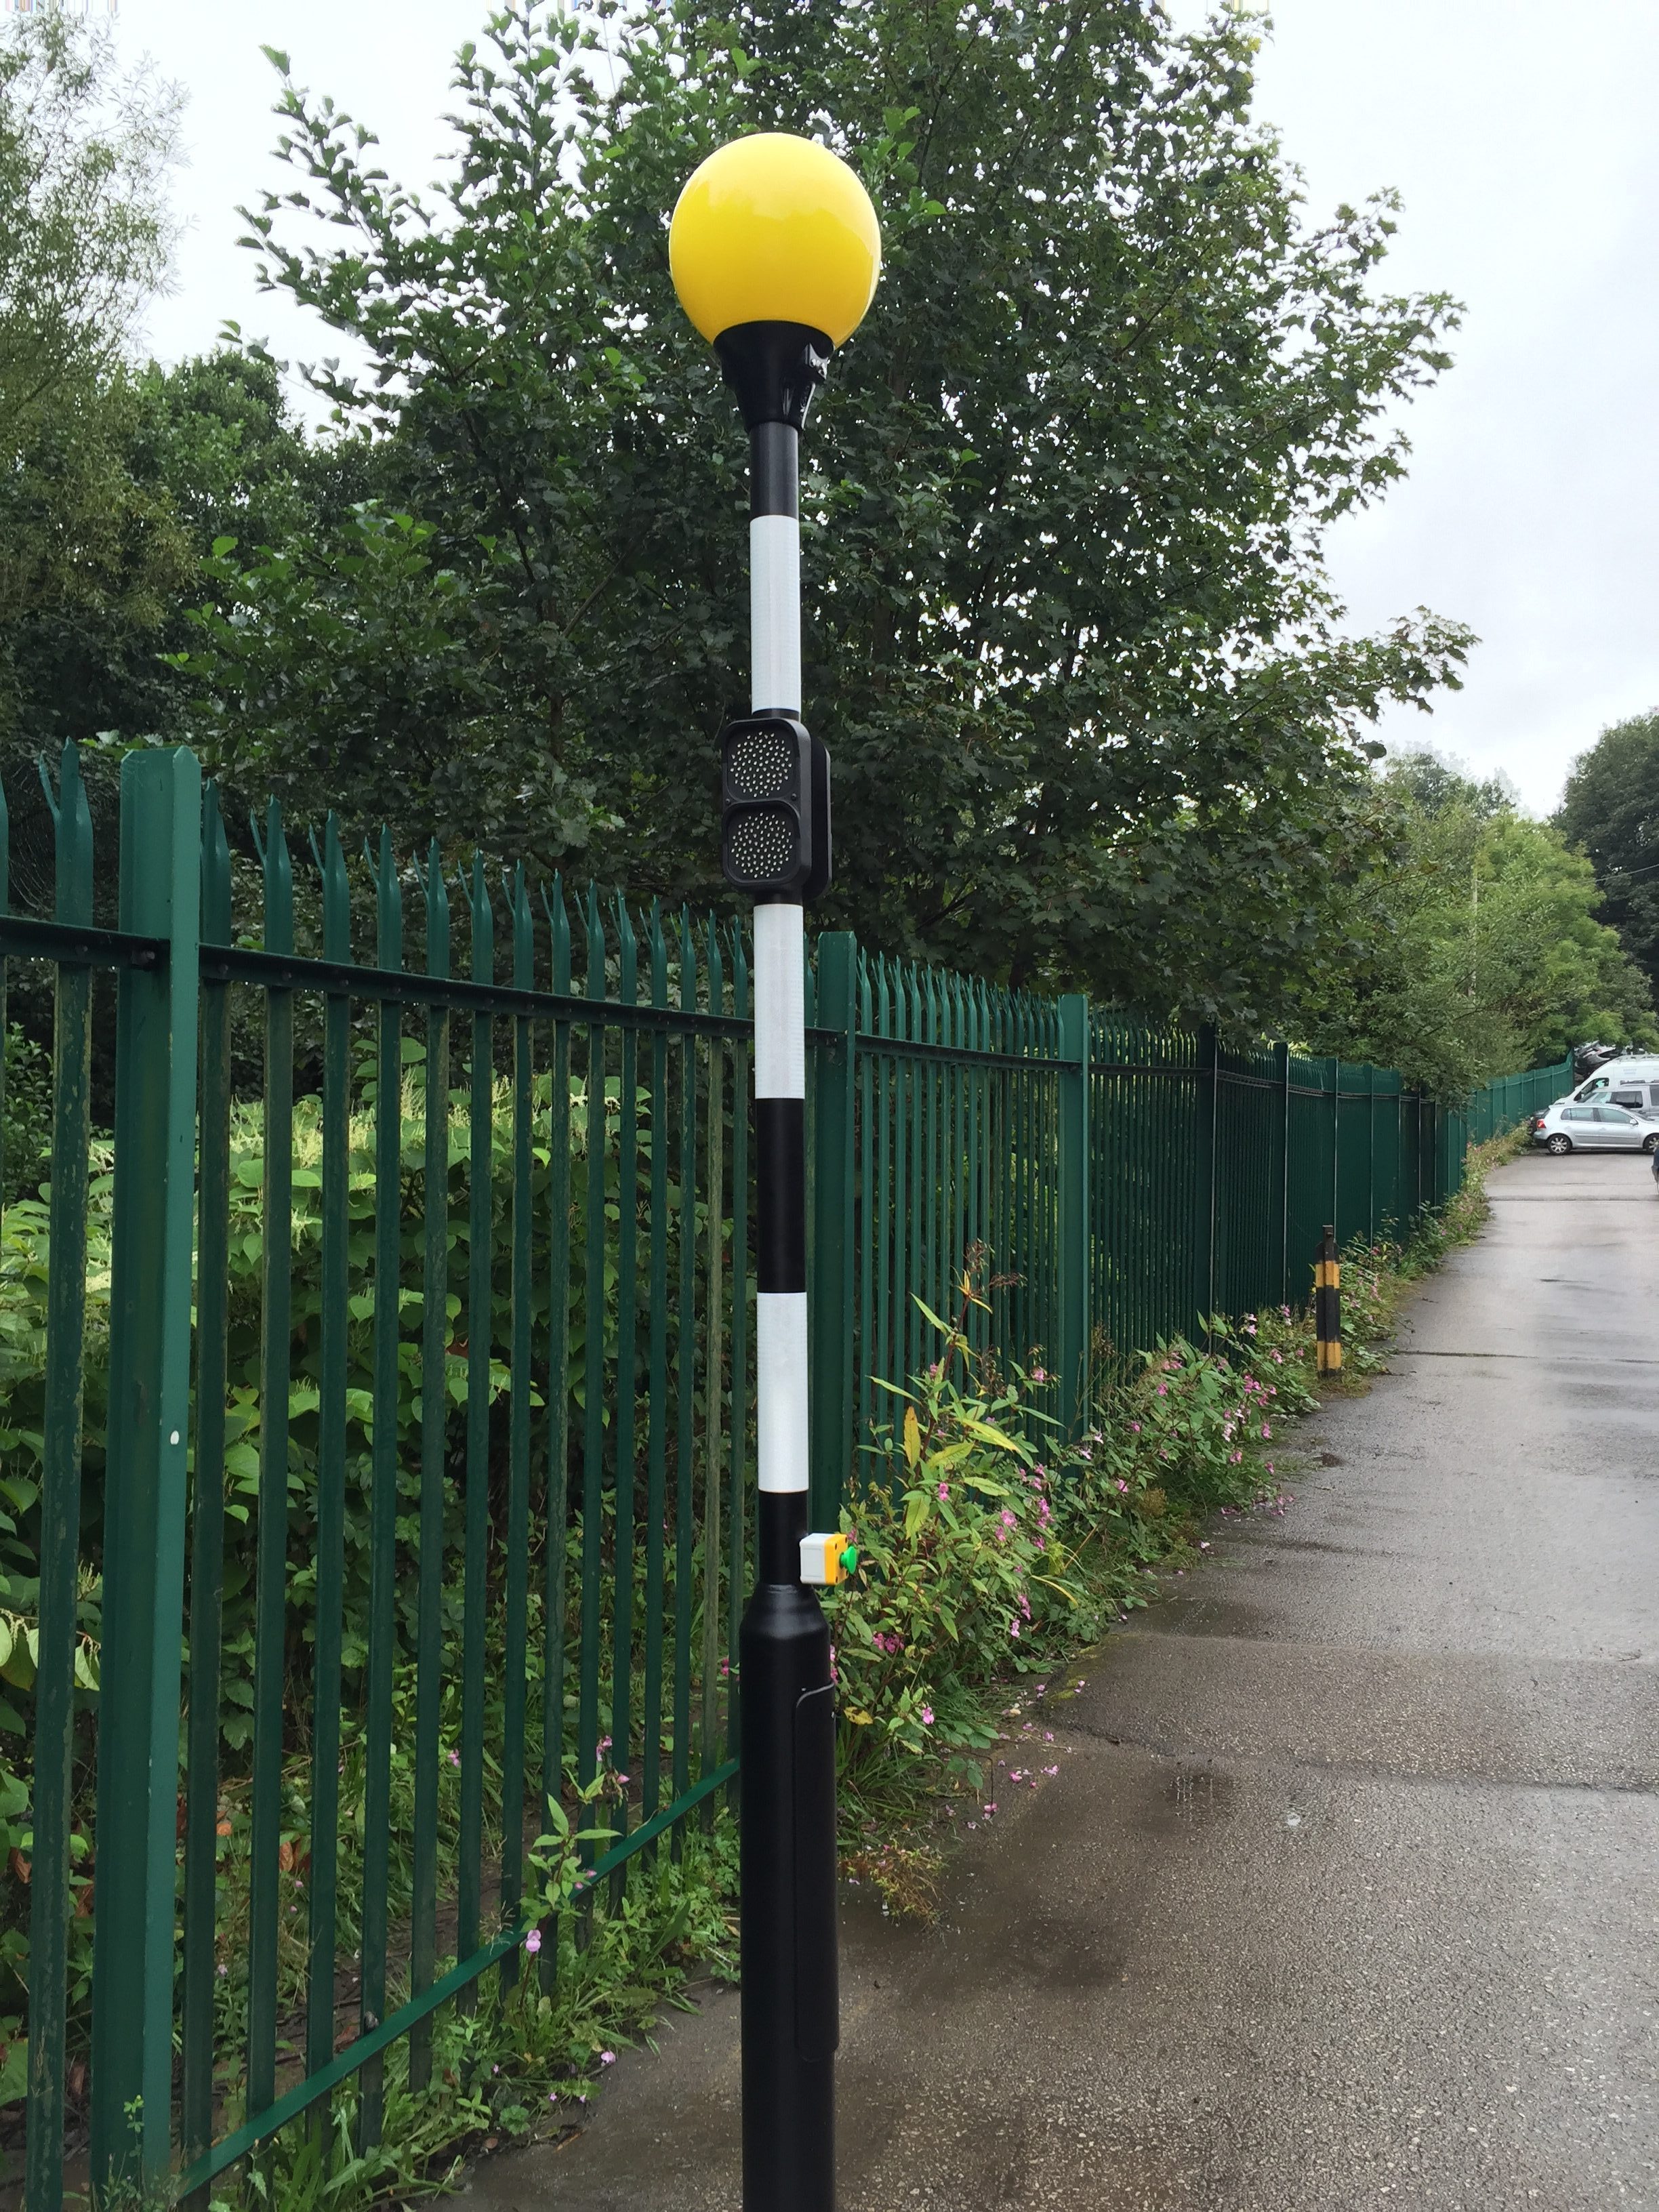 BELISHA BEACON PEDESTRIAN CROSSING WITH PUSH BUTTON ACTIVATED CROSSING  LIGHTS